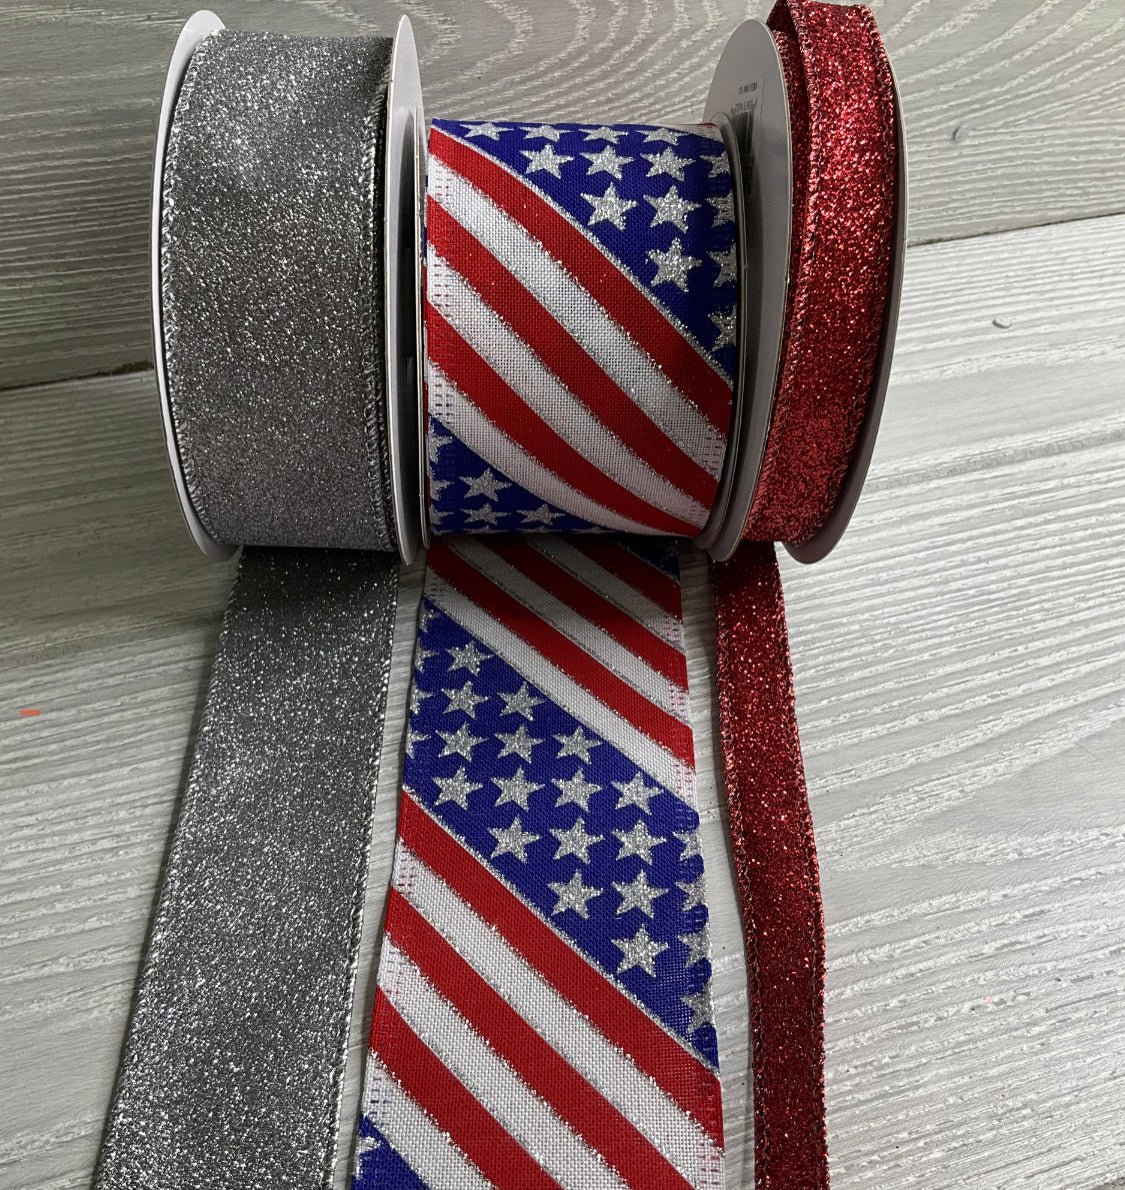 Silver and stars Patriotic bow bundle x 3 ribbons - Greenery MarketWired ribbon